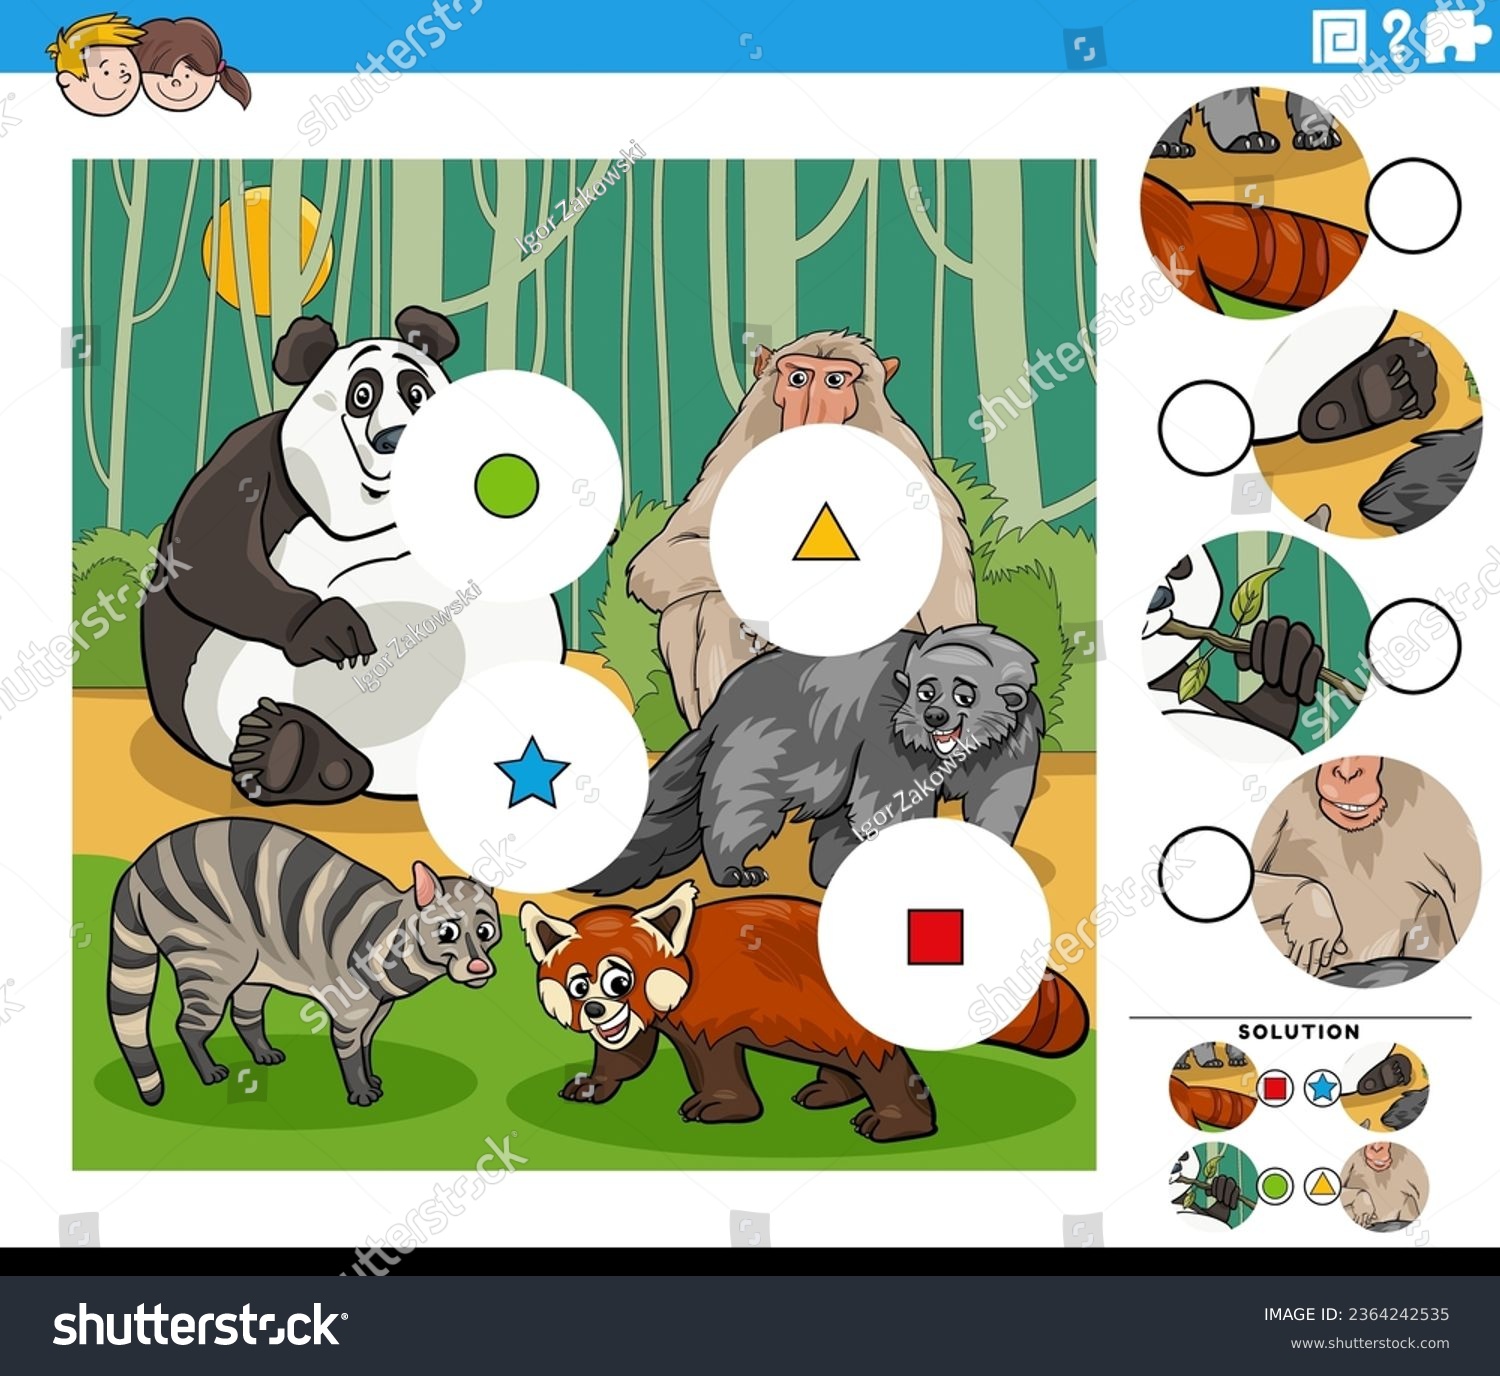 SVG of Cartoon illustration of educational match the pieces jigsaw puzzle game with animal characters svg